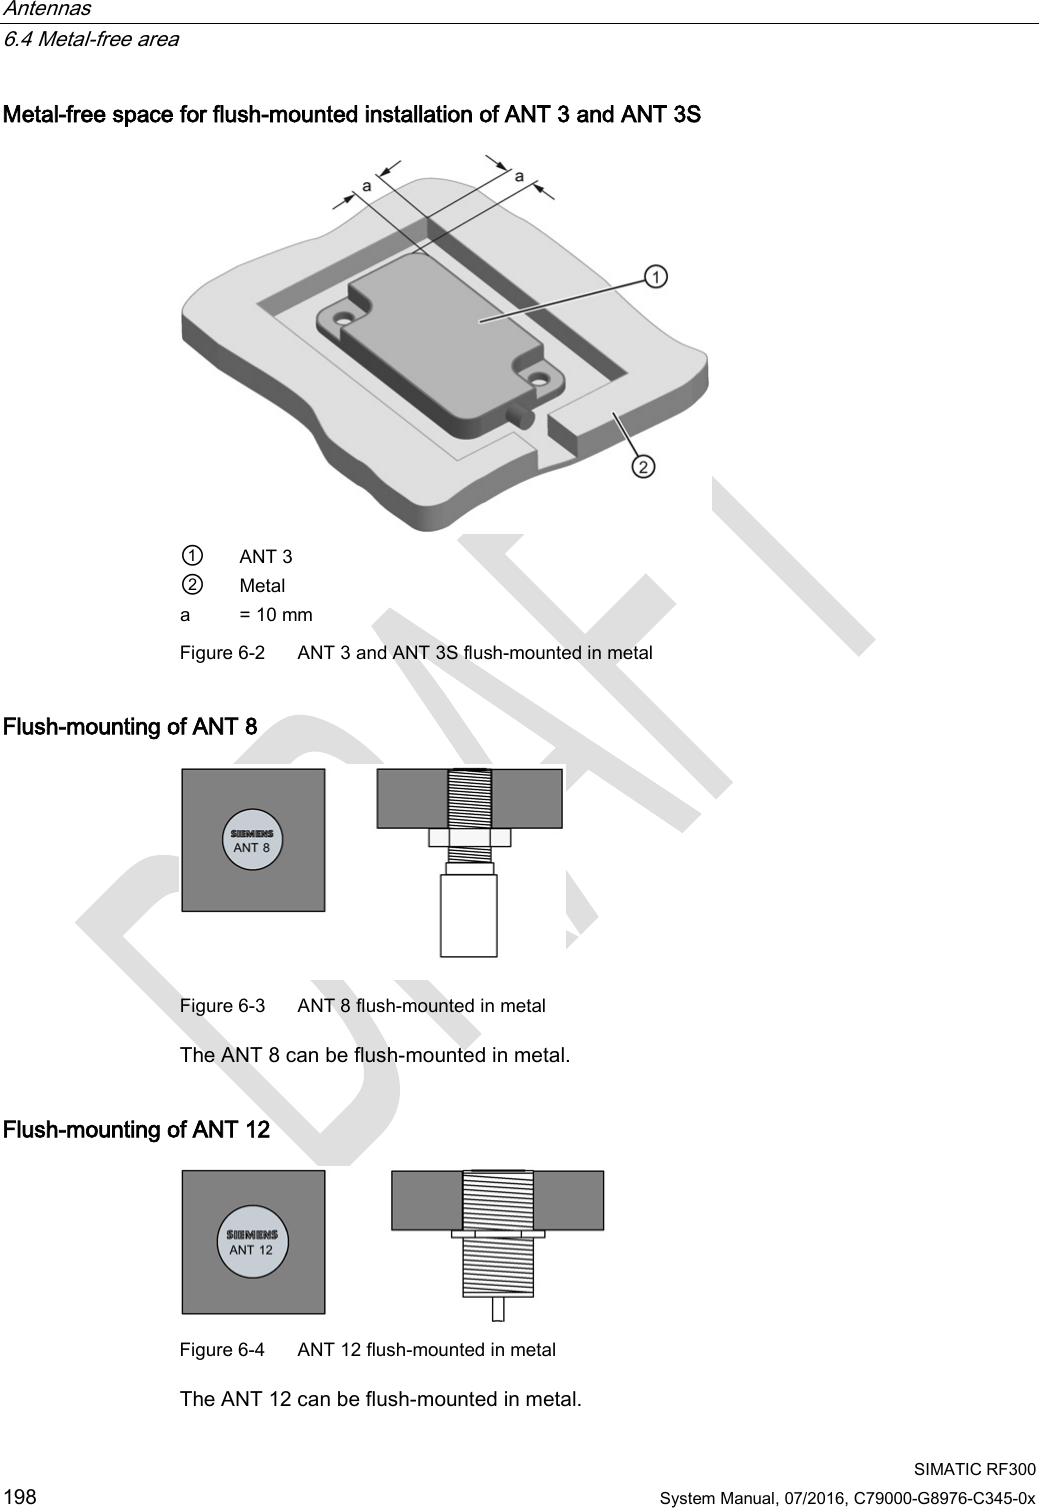 Antennas   6.4 Metal-free area  SIMATIC RF300 198 System Manual, 07/2016, C79000-G8976-C345-0x Metal-free space for flush-mounted installation of ANT 3 and ANT 3S  ① ANT 3 ② Metal a = 10 mm Figure 6-2  ANT 3 and ANT 3S flush-mounted in metal  Flush-mounting of ANT 8  Figure 6-3  ANT 8 flush-mounted in metal  The ANT 8 can be flush-mounted in metal. Flush-mounting of ANT 12  Figure 6-4  ANT 12 flush-mounted in metal  The ANT 12 can be flush-mounted in metal. 